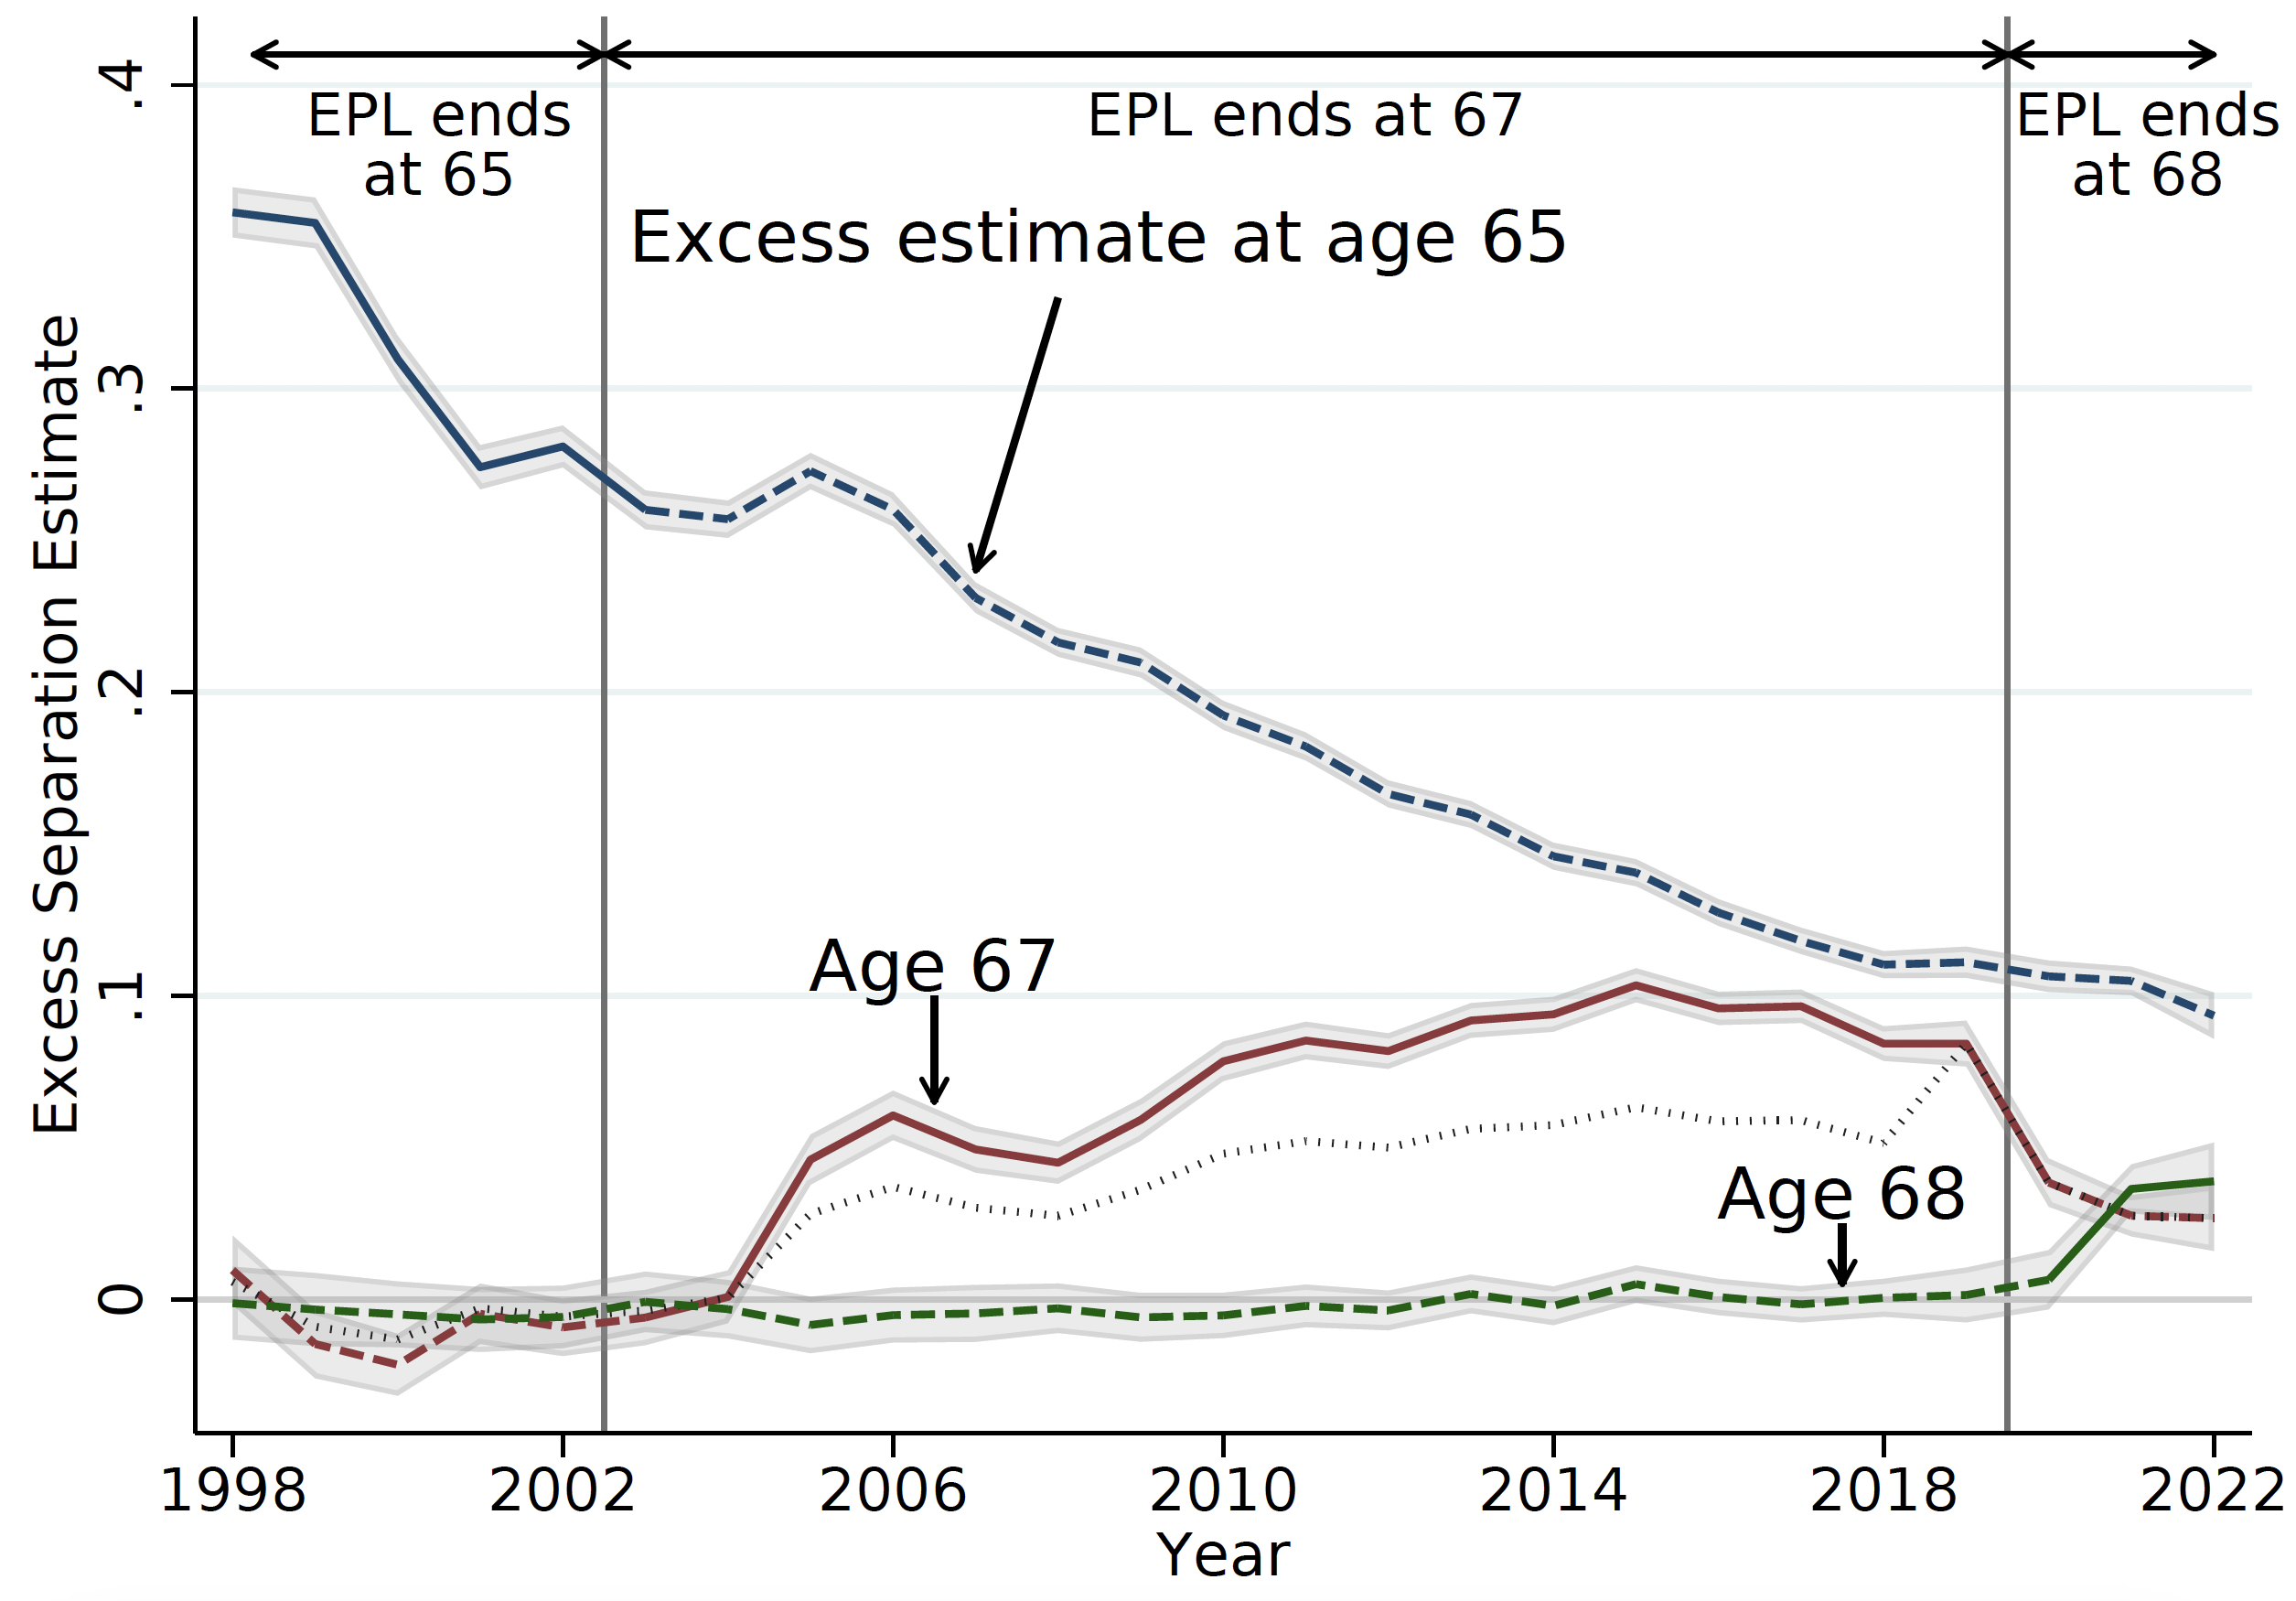 Figure 4 Excess separations by year at ages 65, 67, and 68